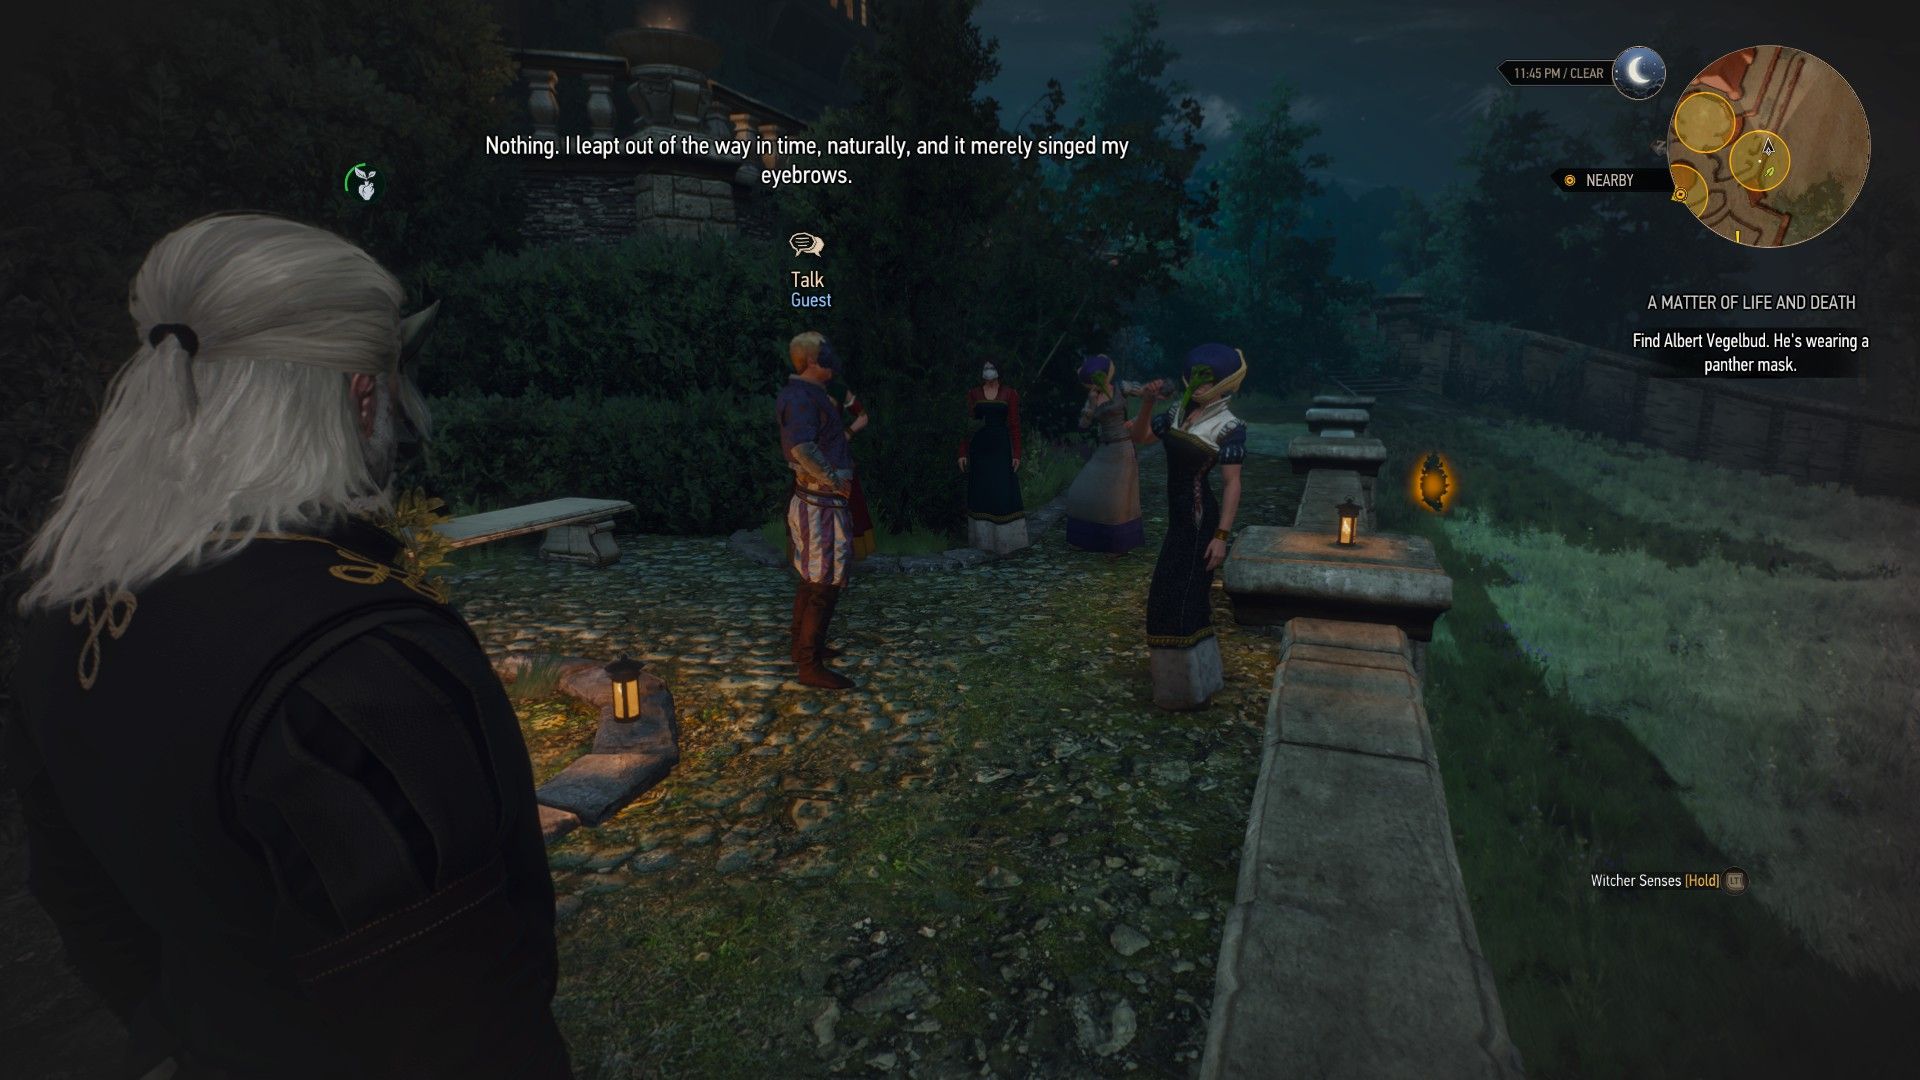 A screenshot of Geralt staring at a quest objective in the center of the shot.